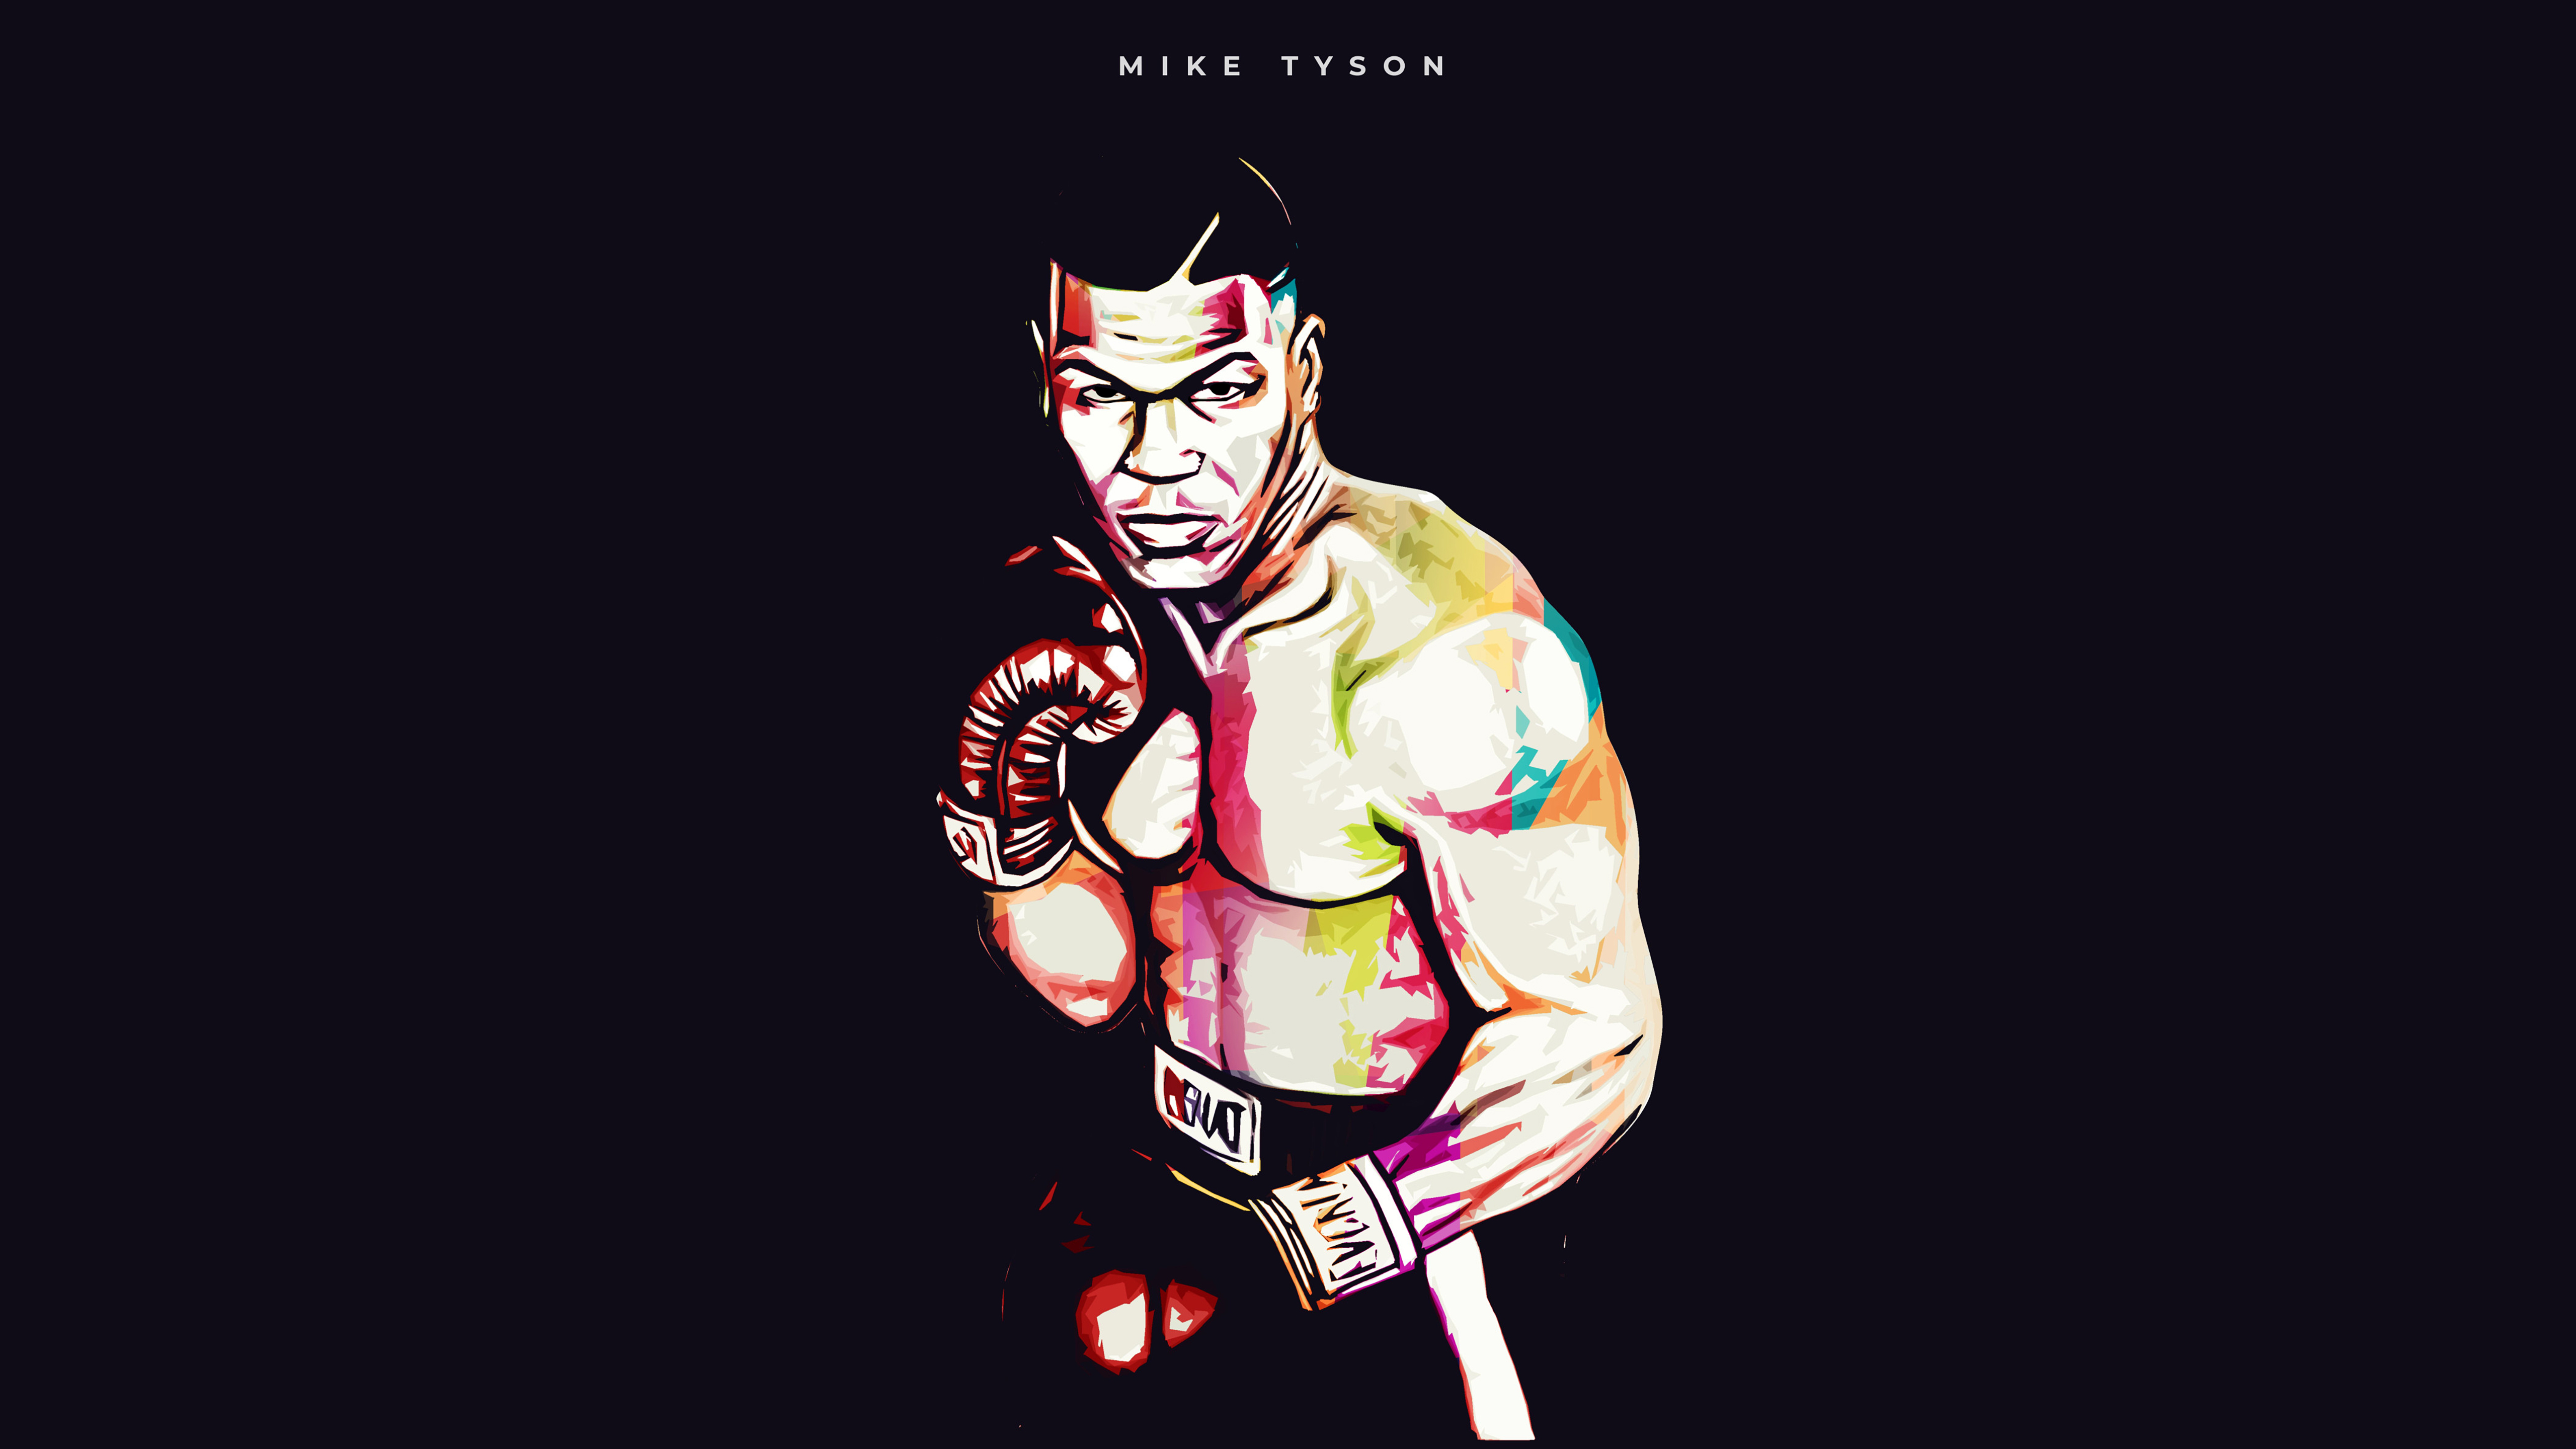 Mike Tyson Wallpapers and Backgrounds  WallpaperCG